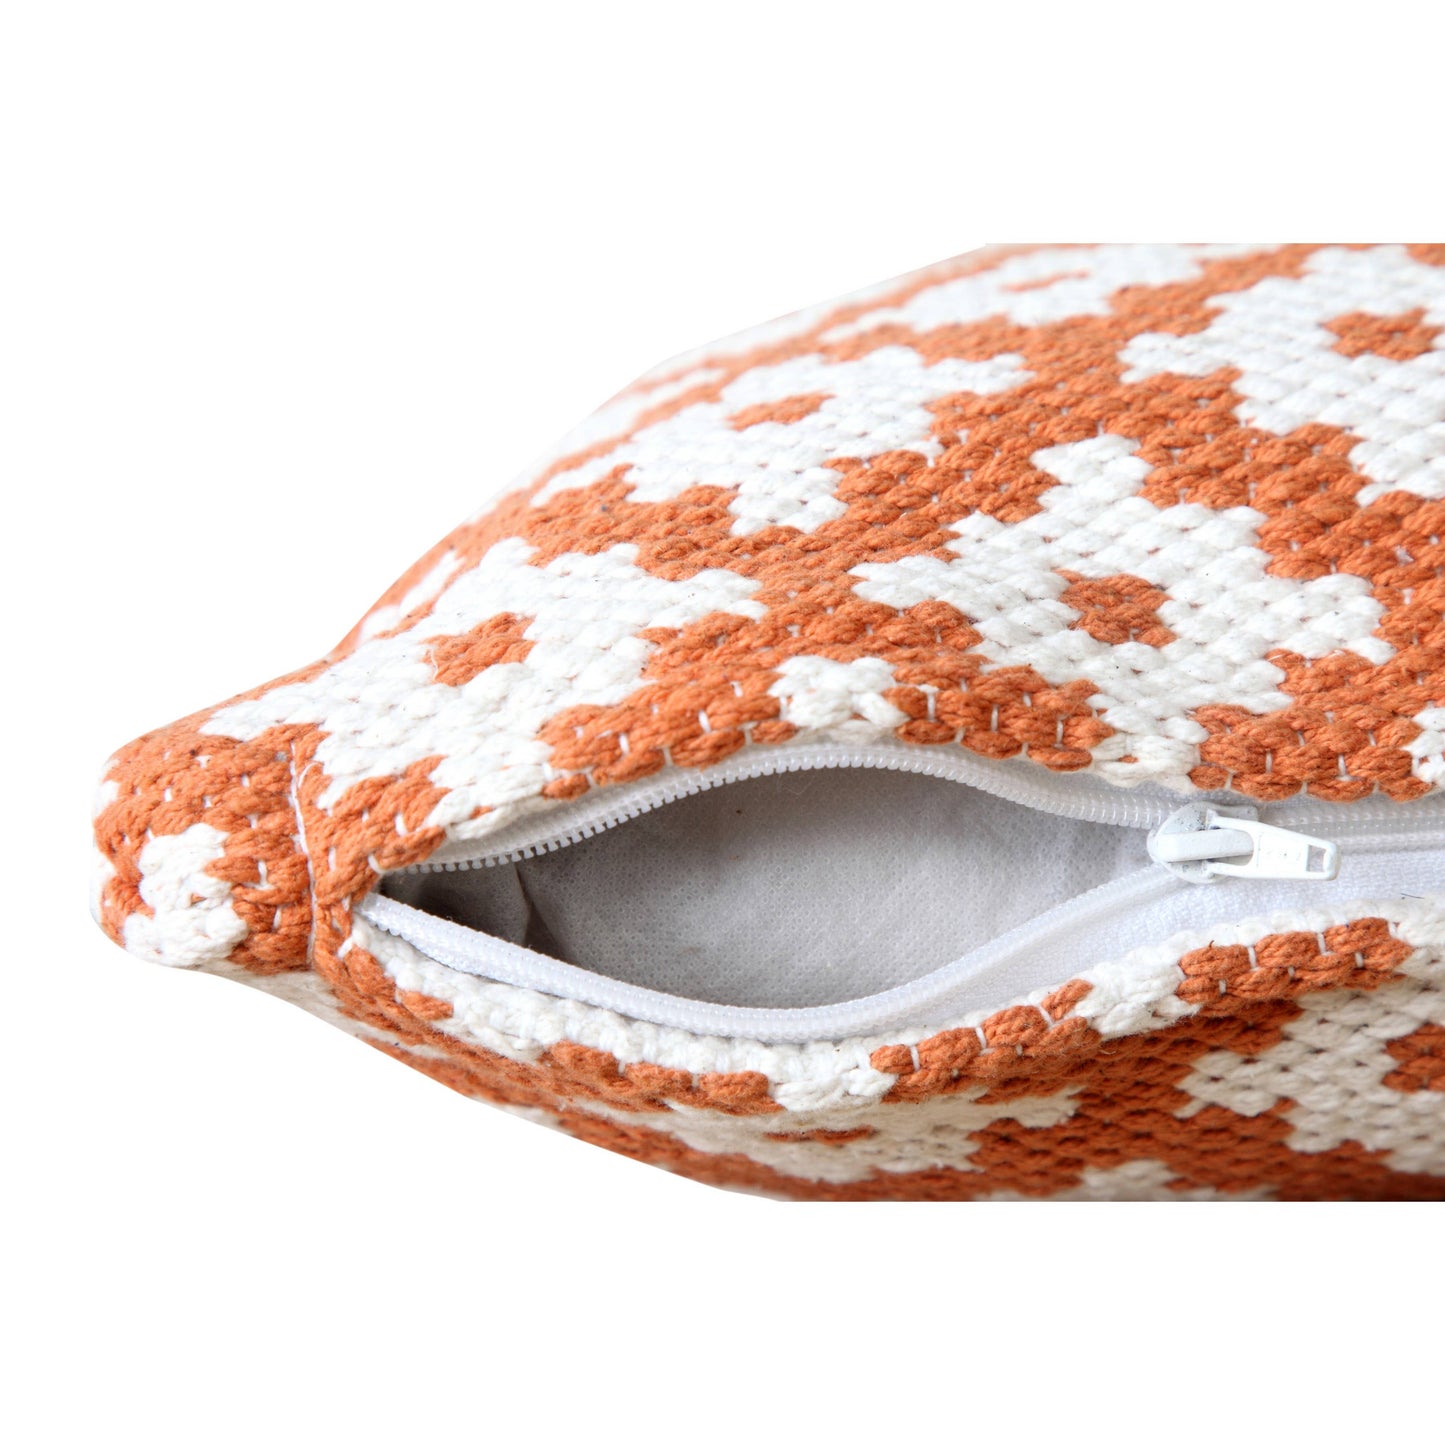 The geo-floral pillow shown on its side with its zipper open to show how the insert can be removed